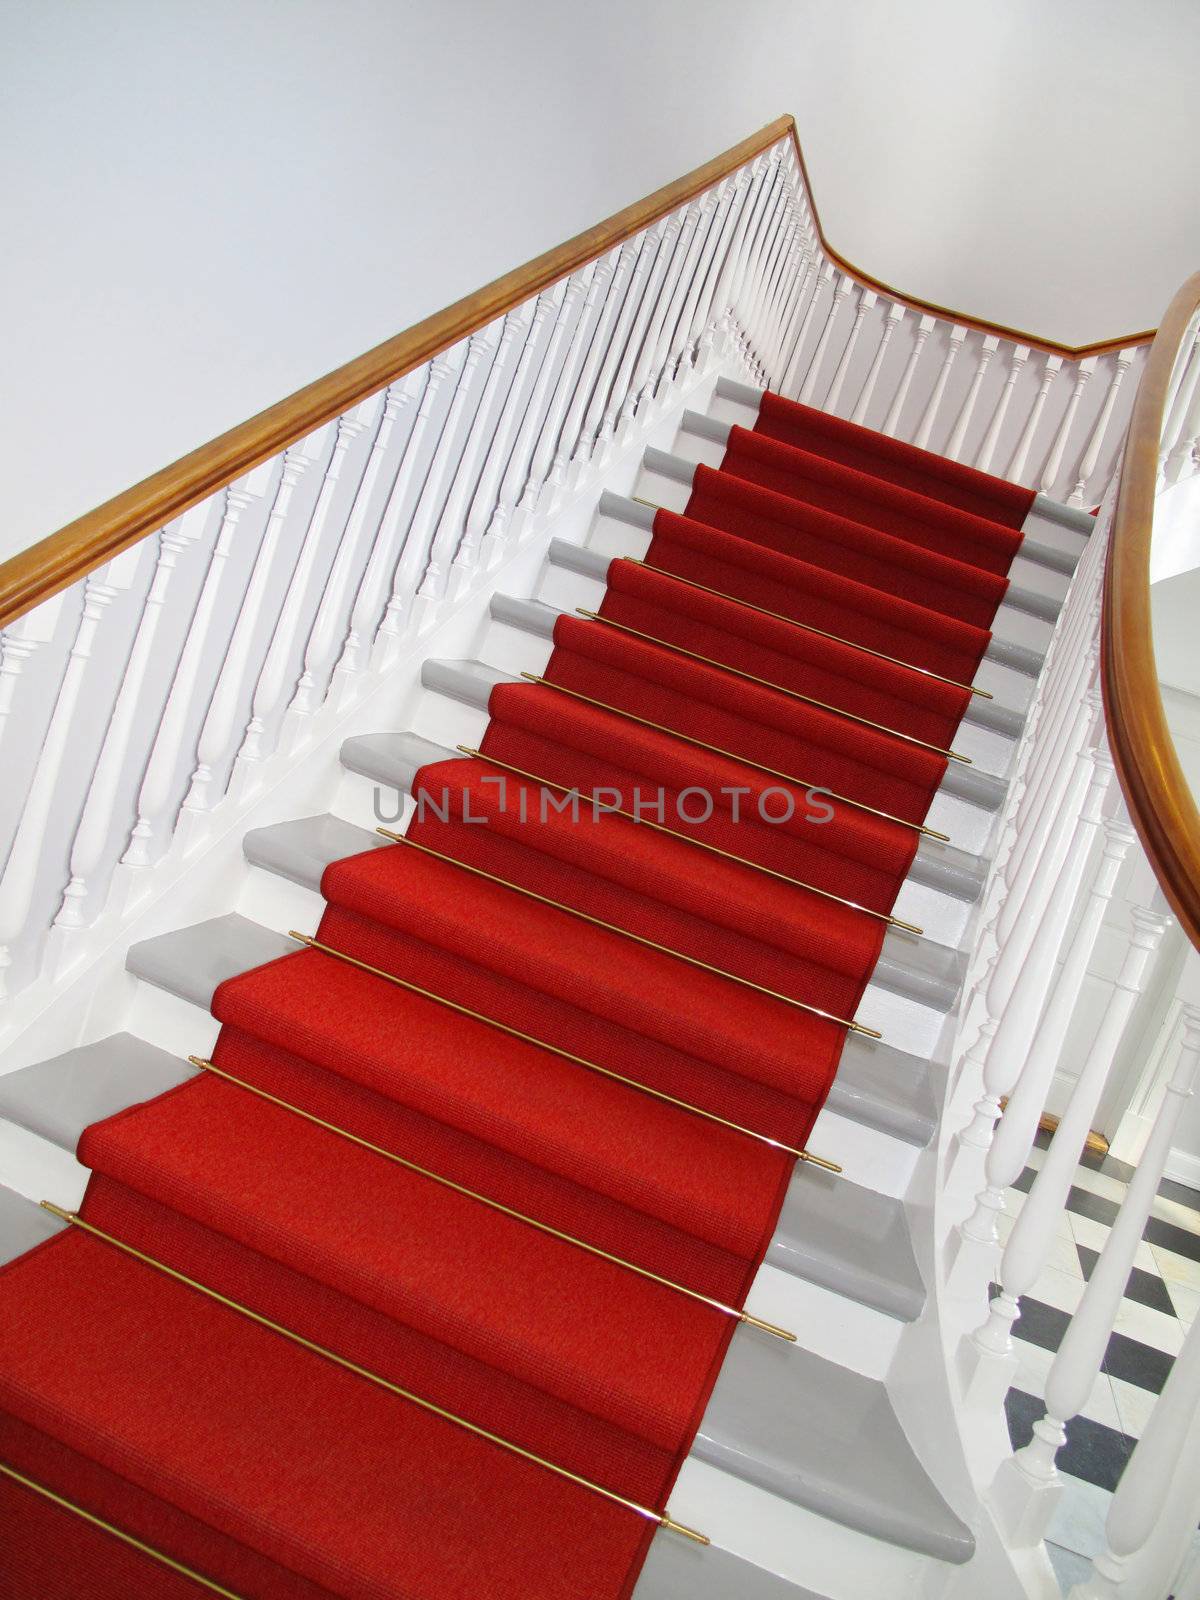 Nice old staircase with red carpet.